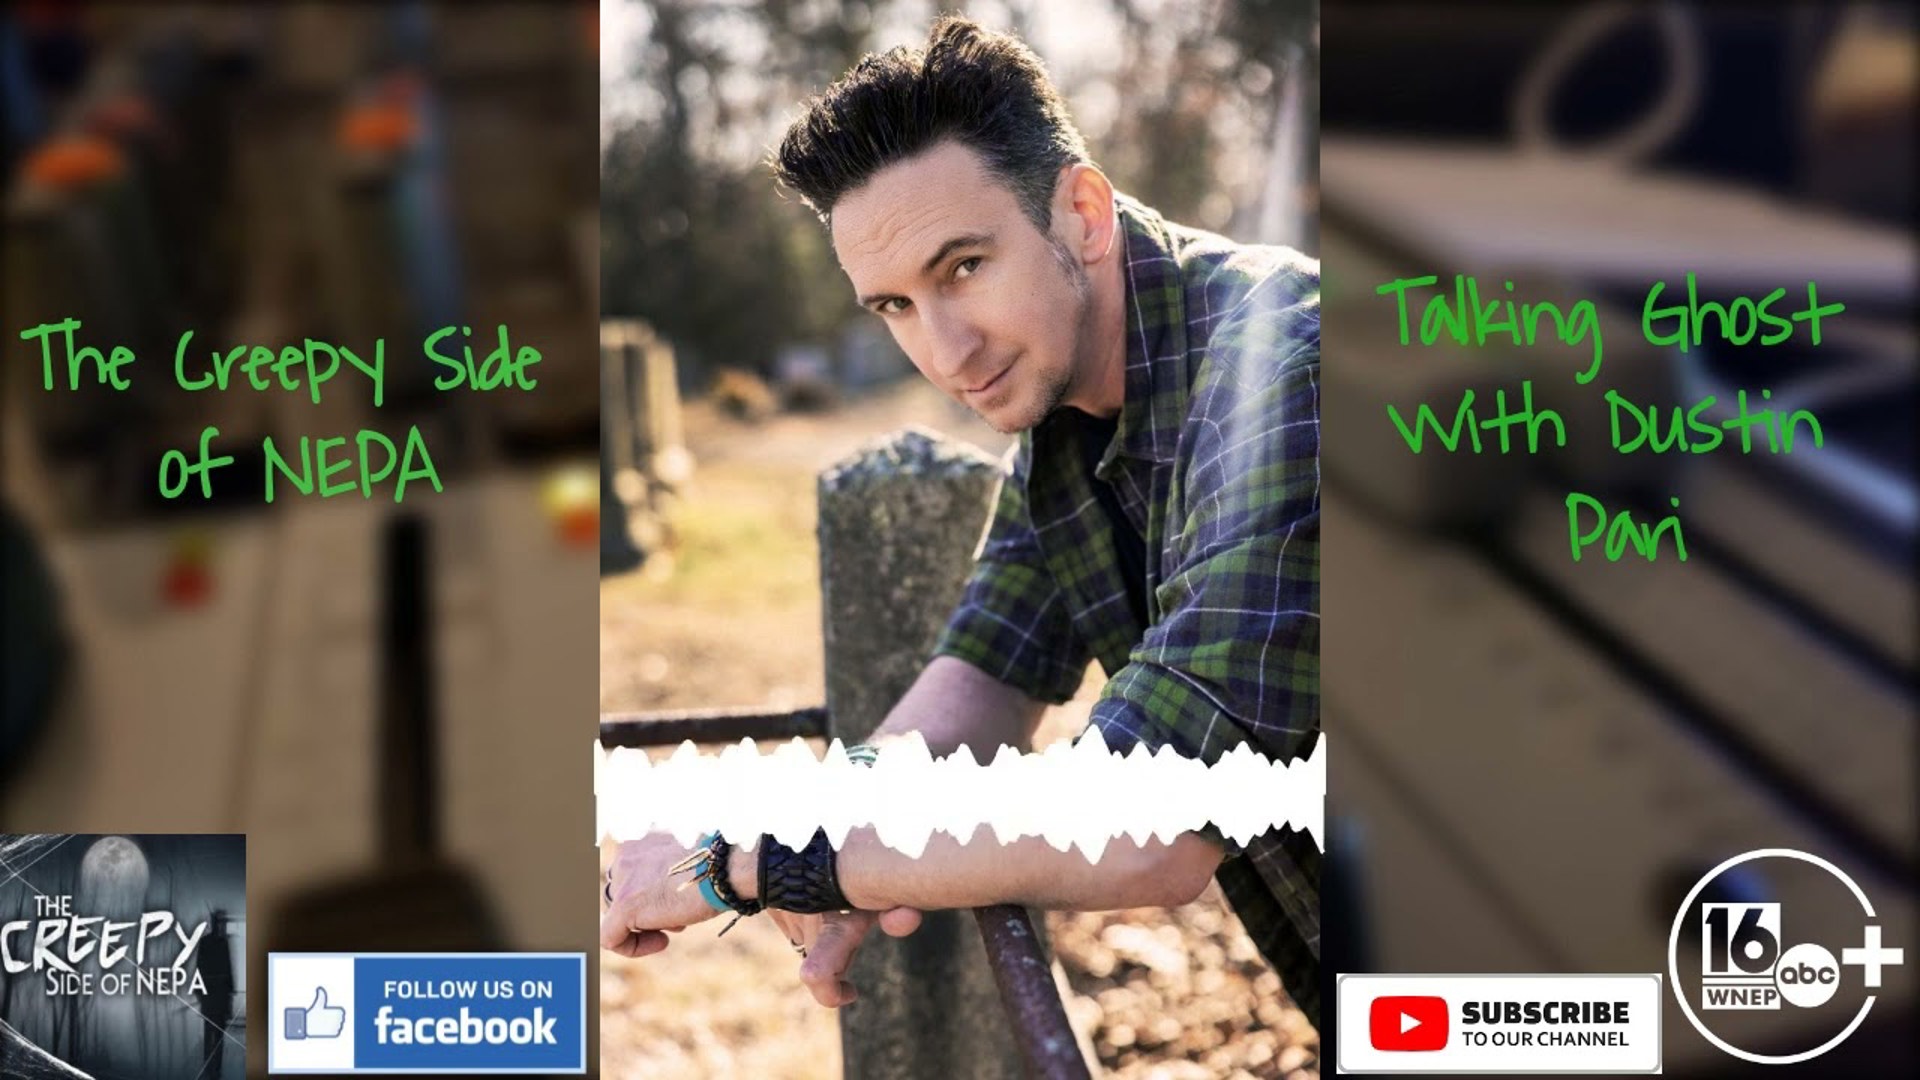 Dustin Pari shares spine-tingling evidence and hair-raising stories from his paranormal investigations around the globe.